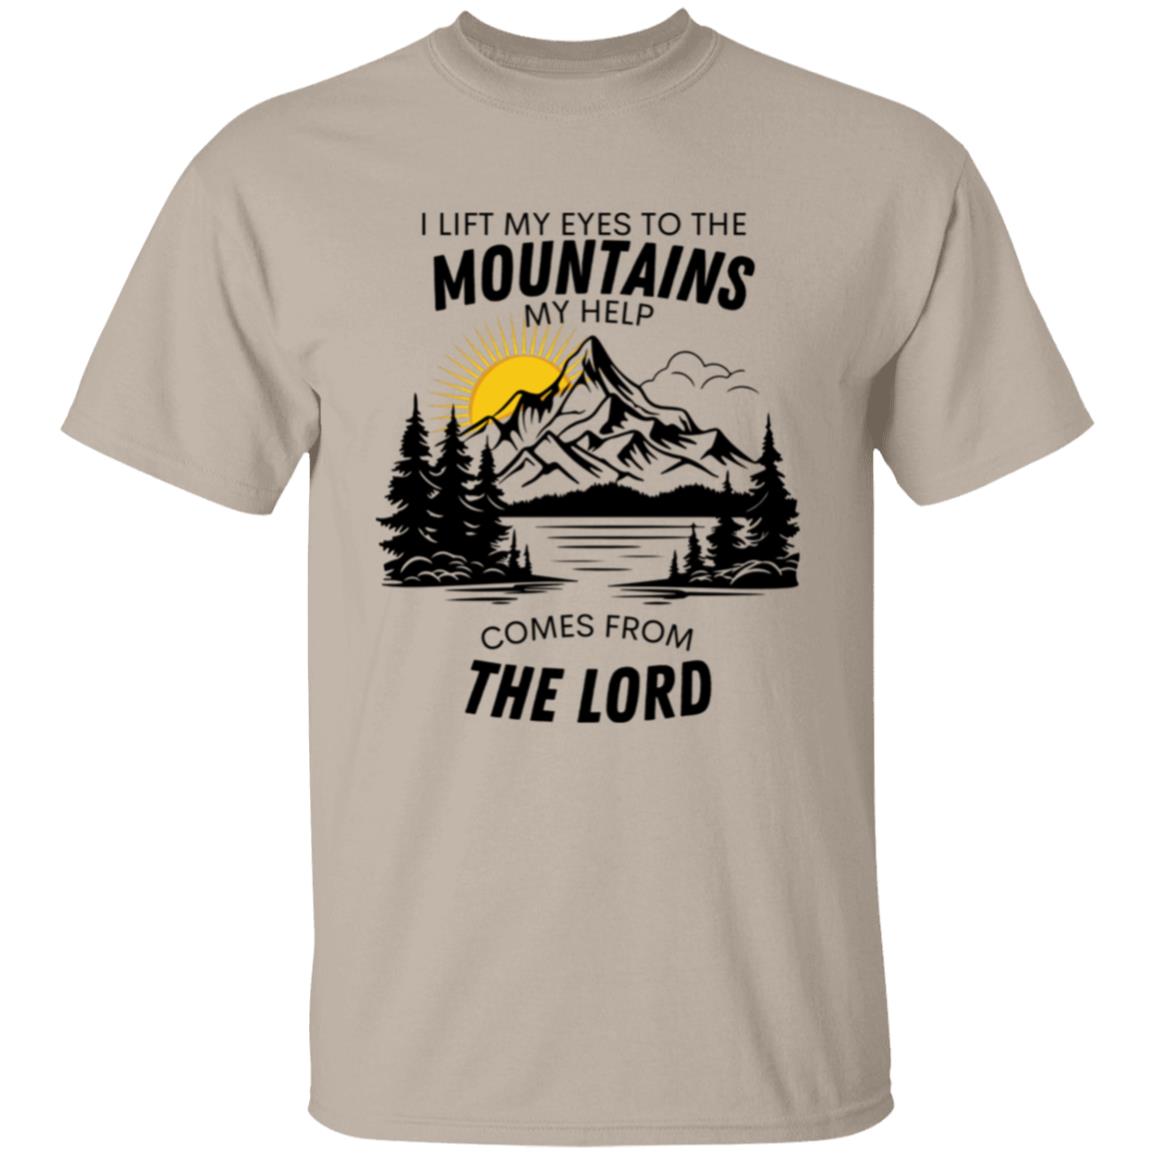 Get trendy with I LIFT MY EYES TO THE MOUNTIAINS I Lift My Eyes Up to the Mountains T shirt - Apparel available at Good Gift Company. Grab yours for $10.95 today!